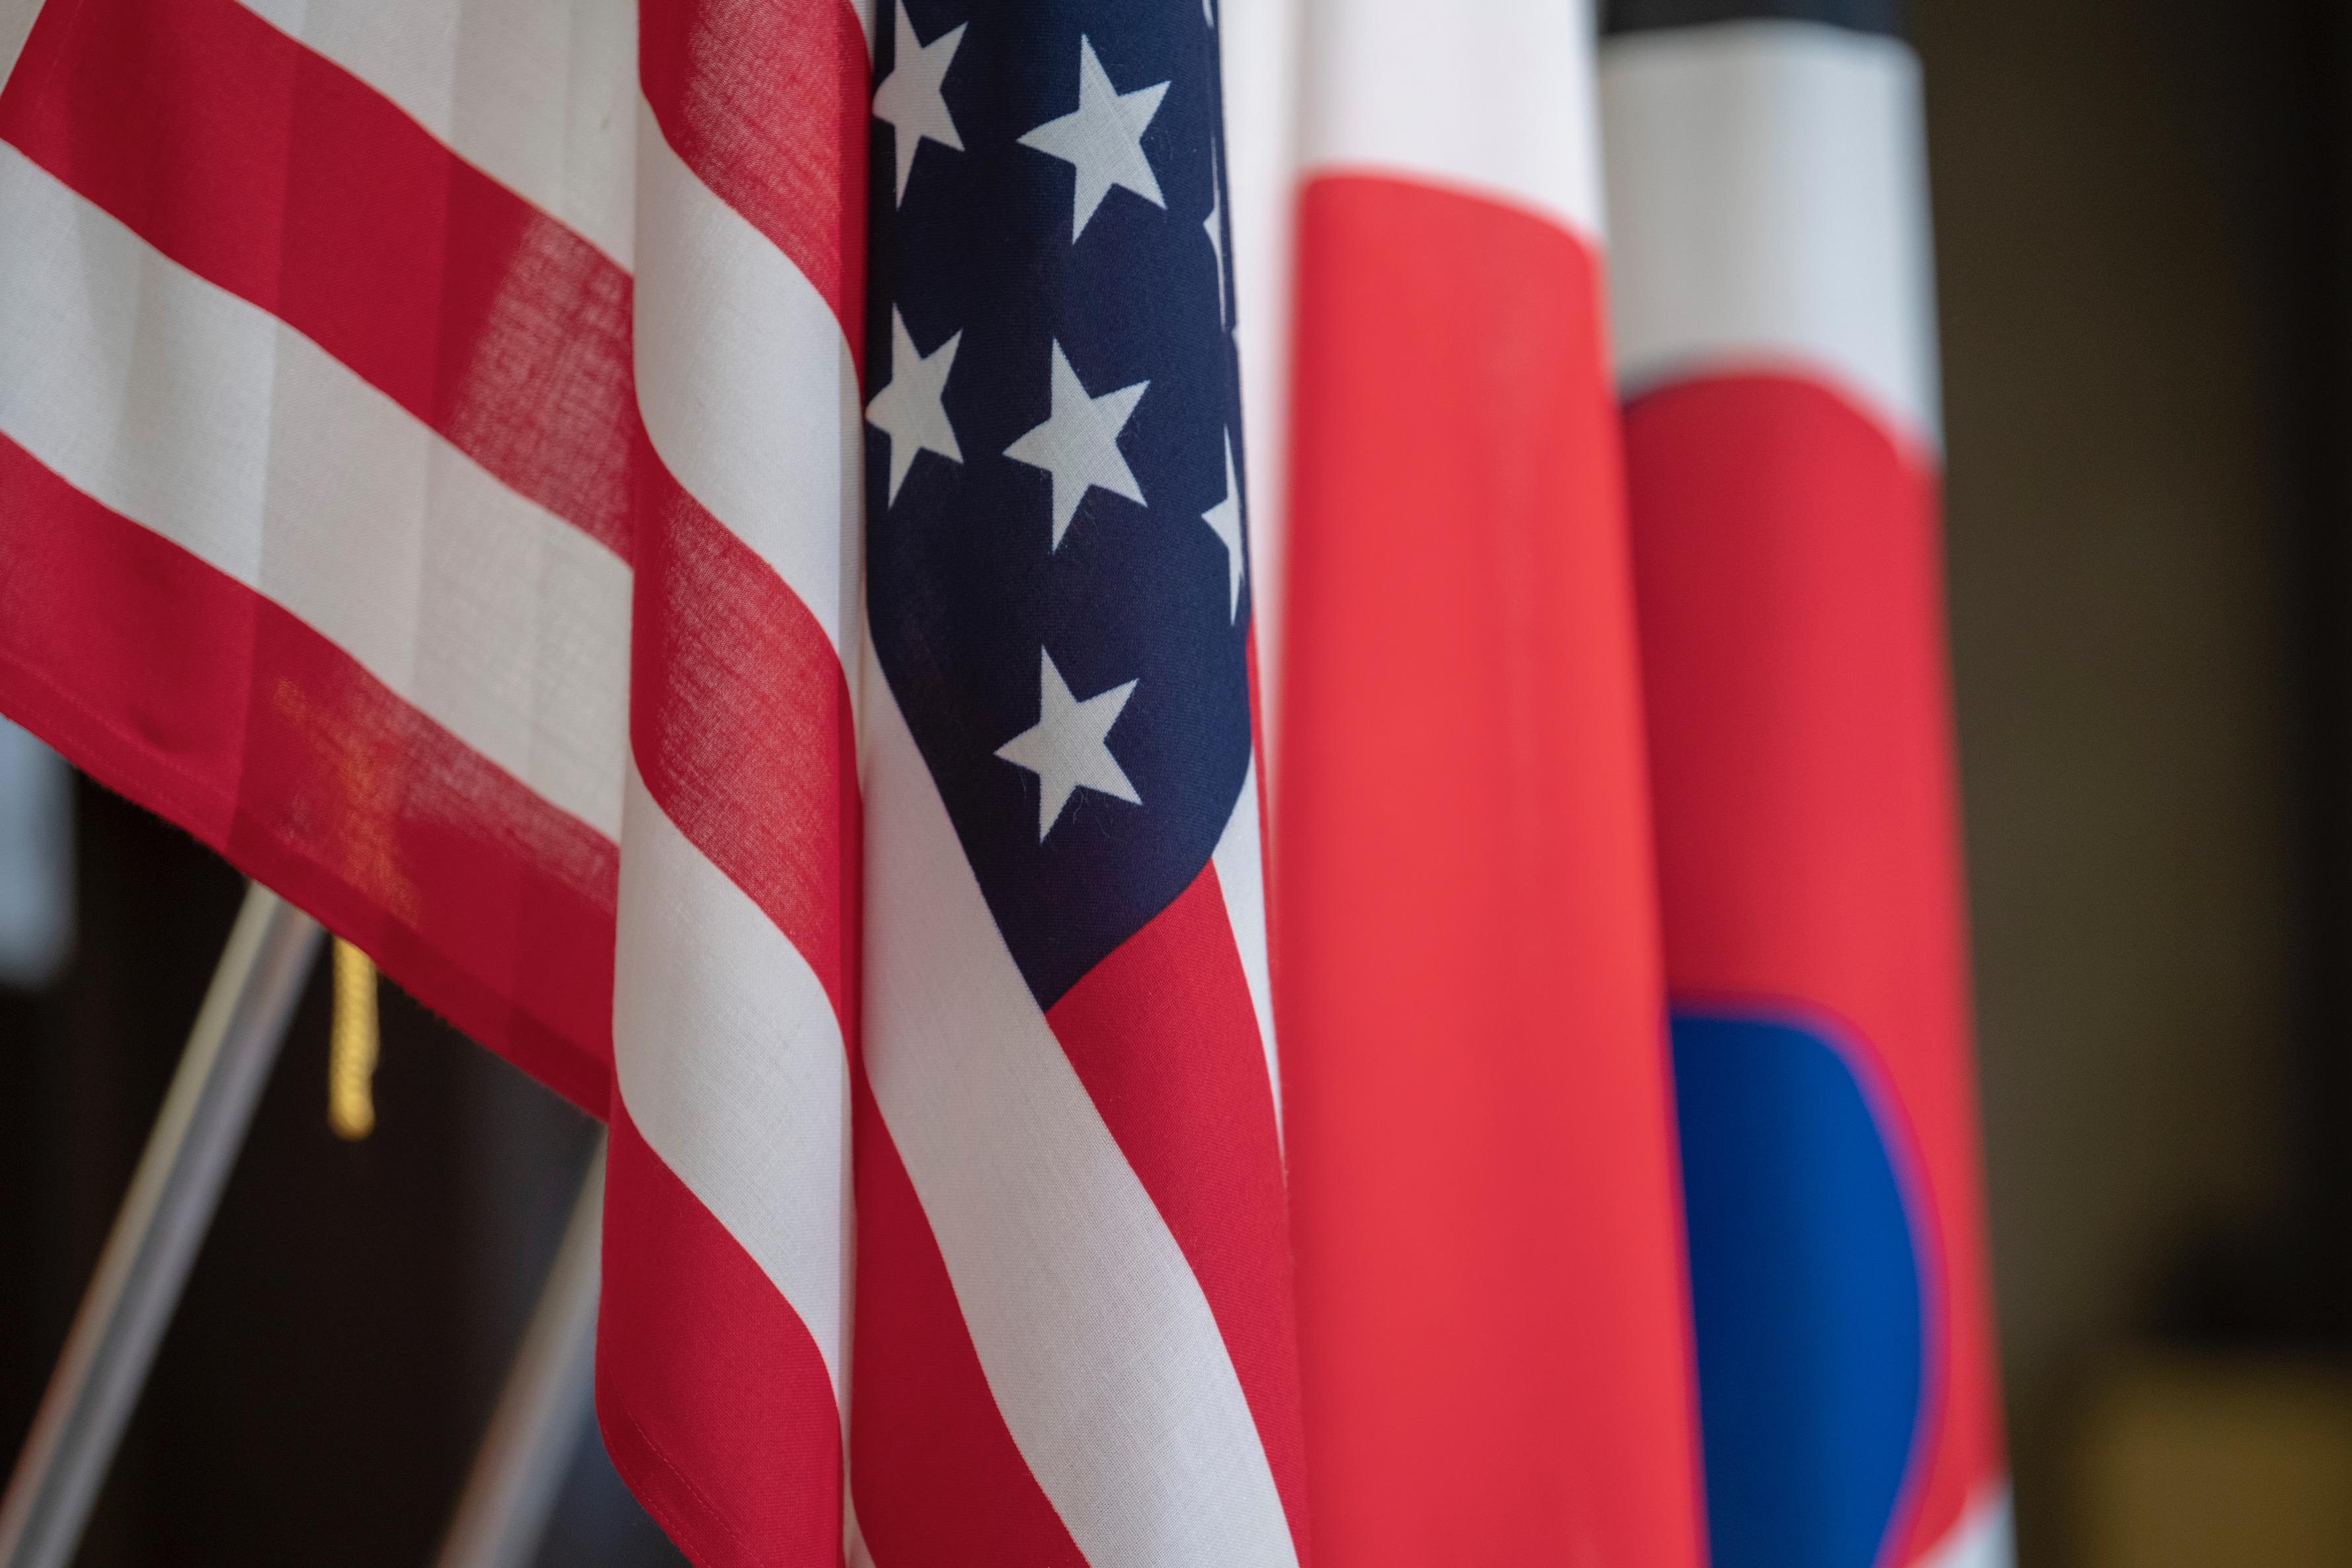 Flags representing the United States, Japan and the Republic of Korea